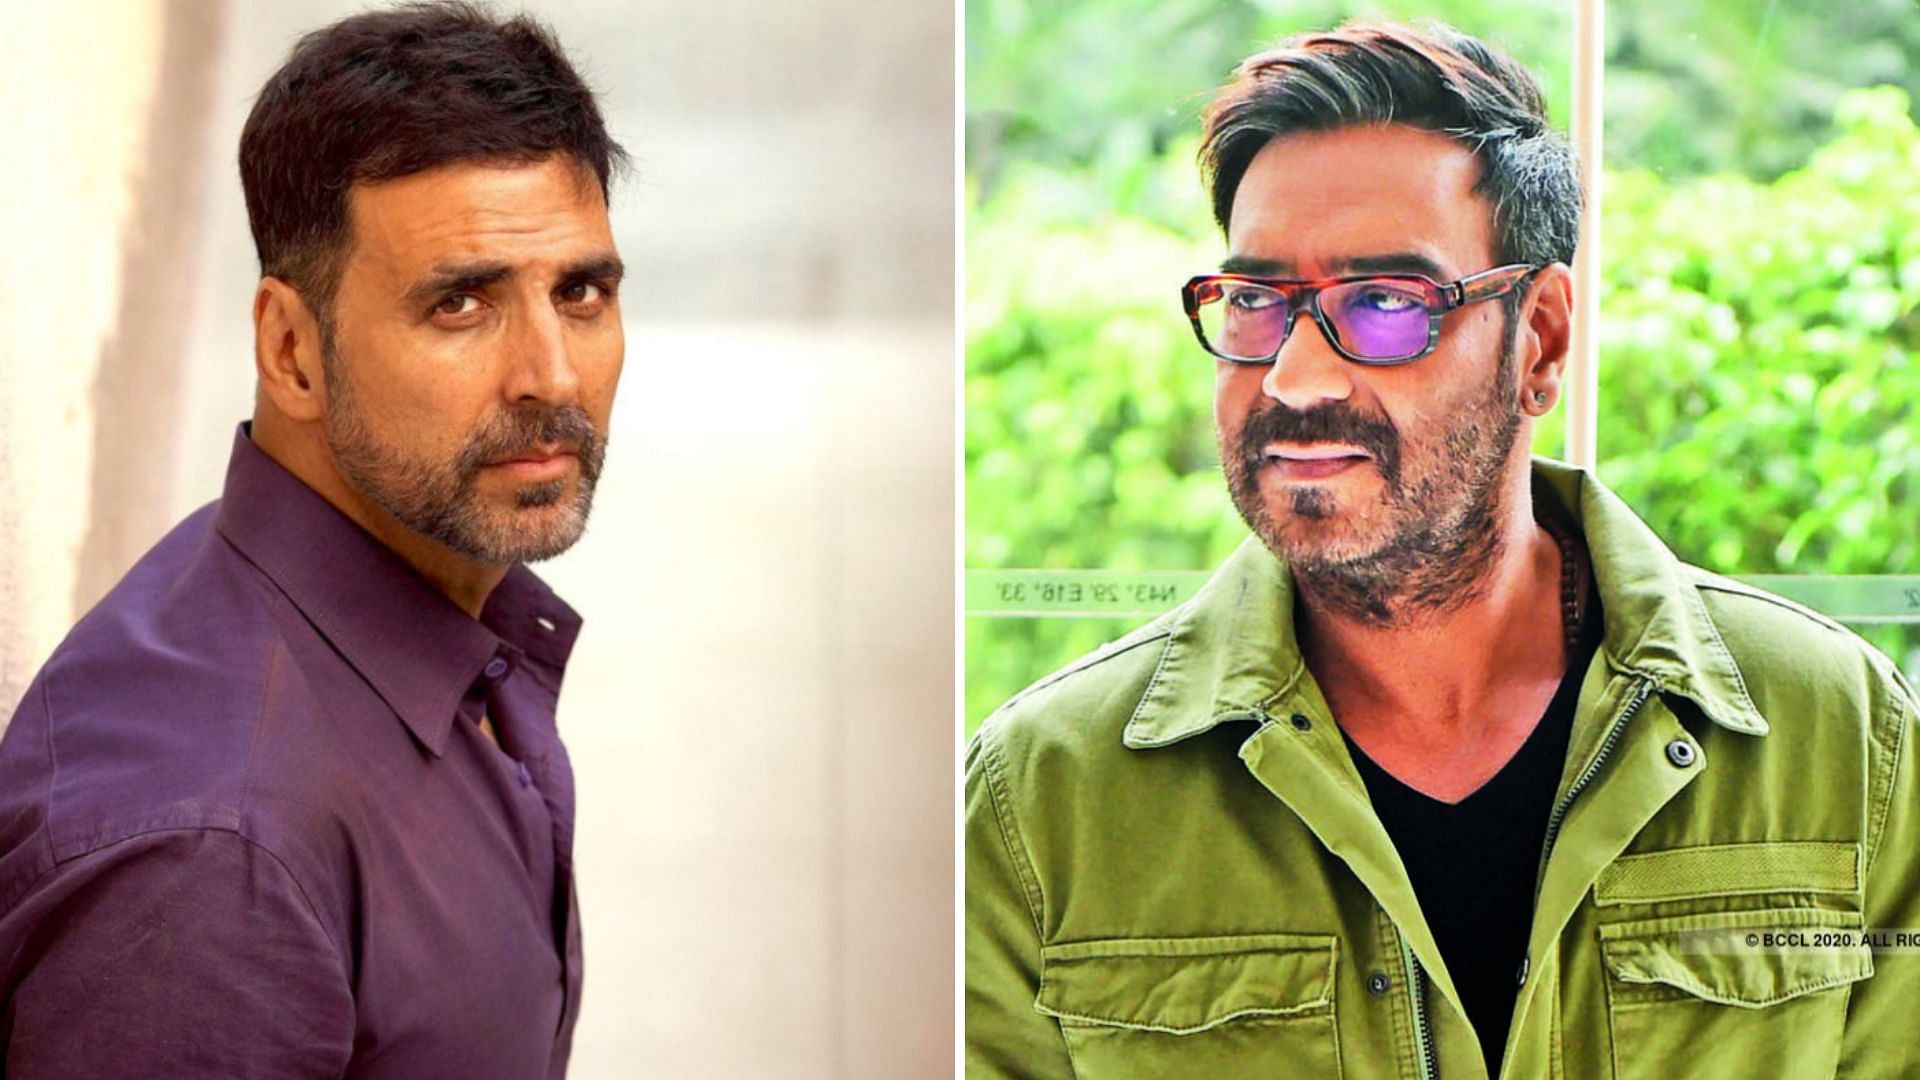 Akshay Kumar and Ajay Devgn talk about the release of movies on streaming platforms.